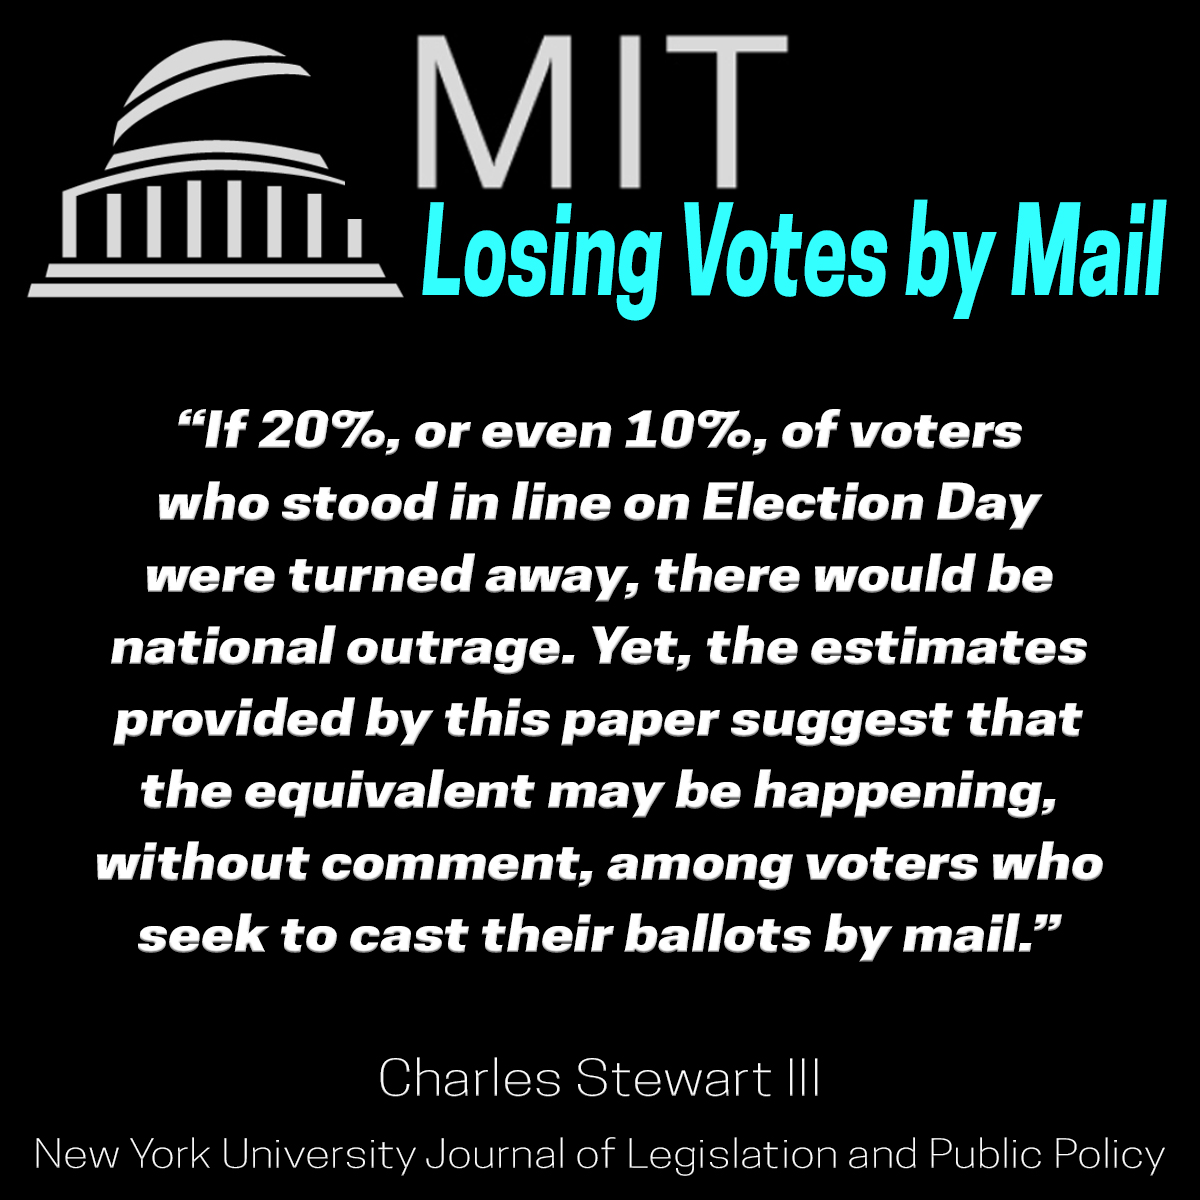 However, what Twitter fails to mention is that the GOP has a nasty habit of using the mail-in voting system to commit election fraud.An MIT study, Losing Votes by Mail, found that a breathtaking 22% of mail in ballots never get counted.